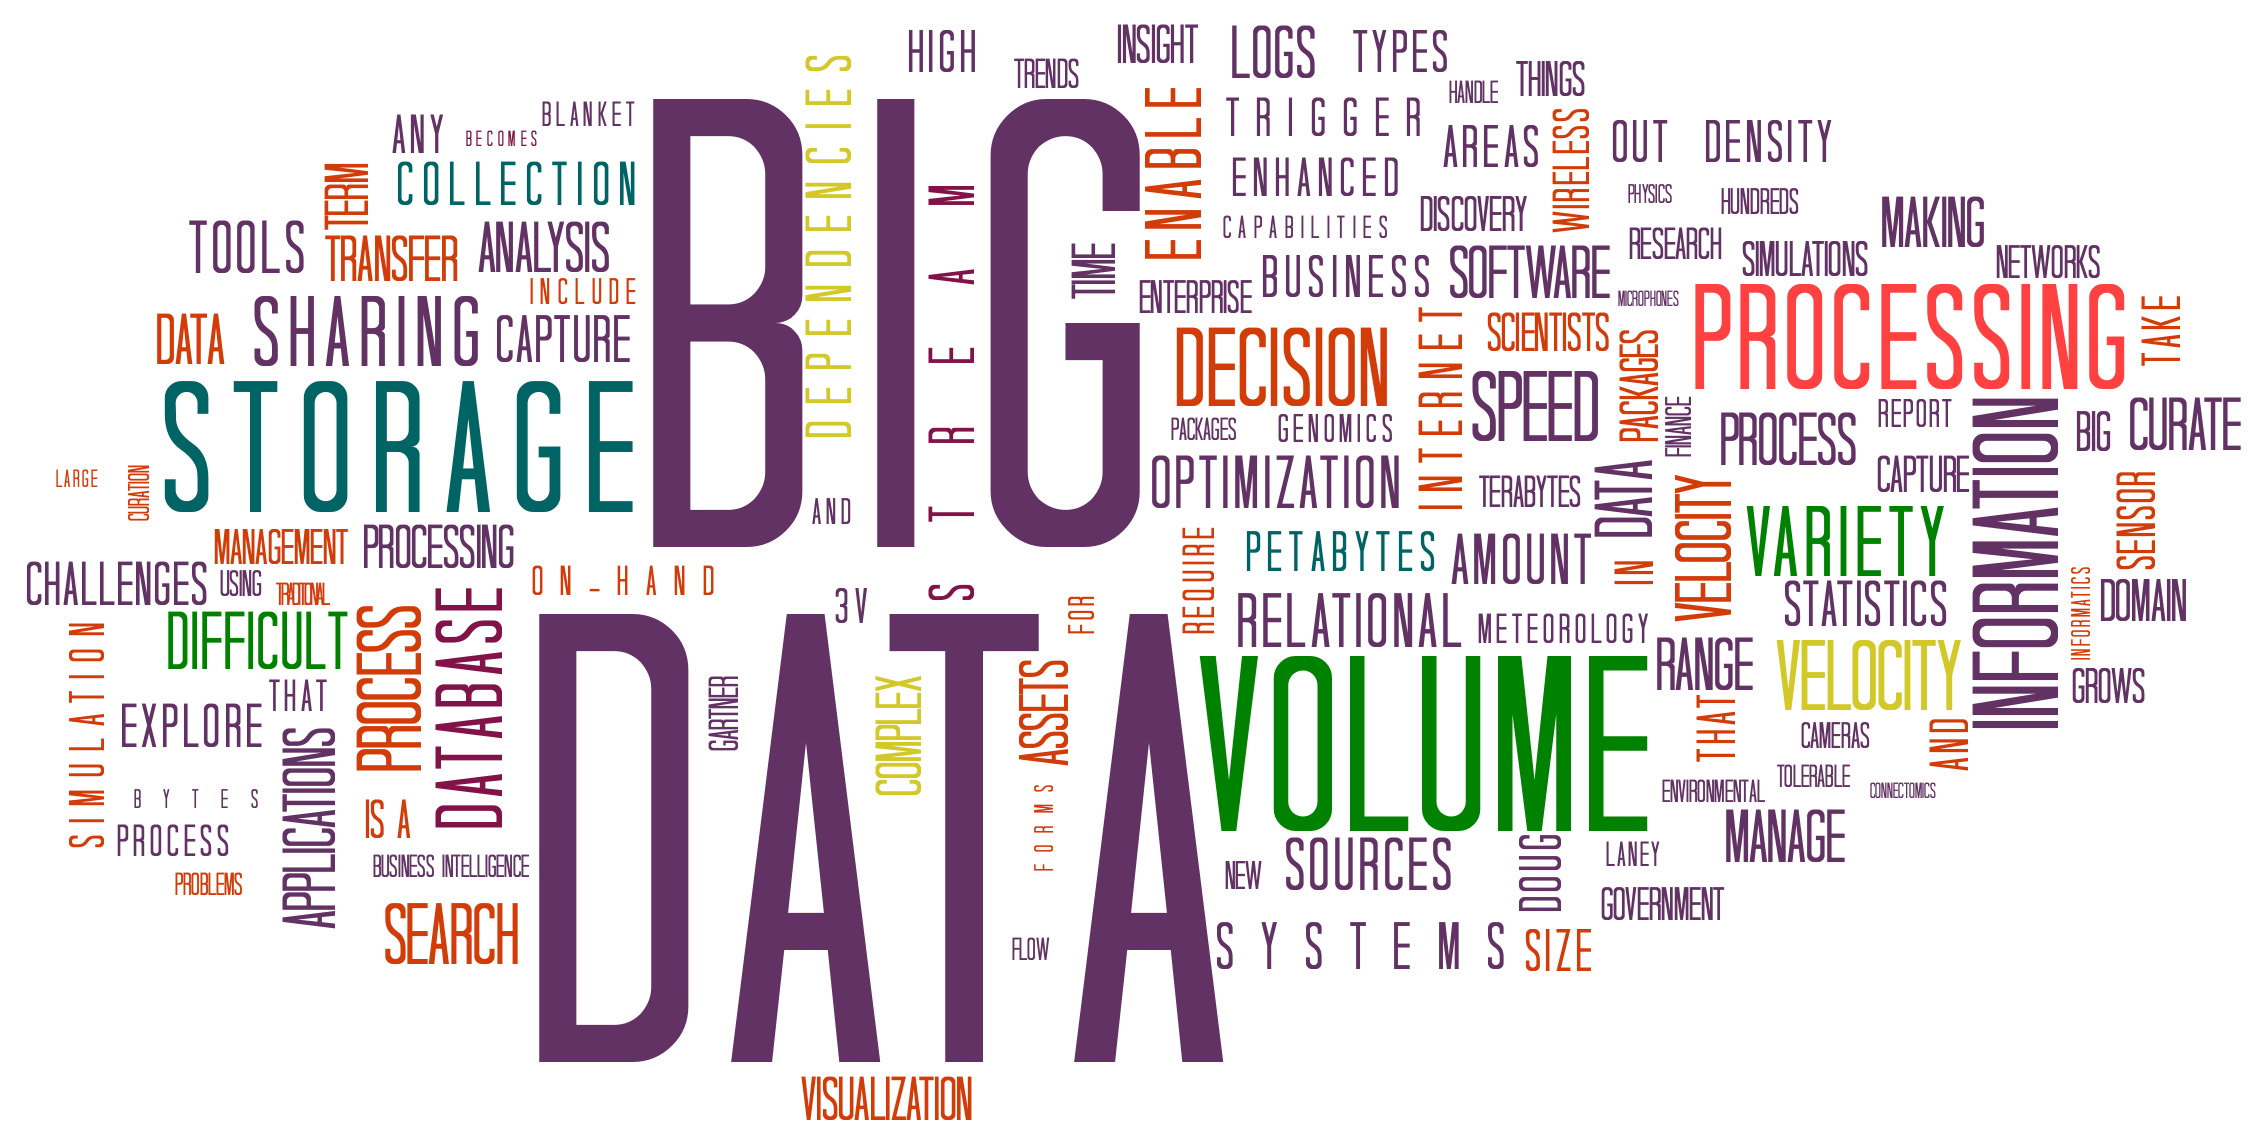 Word cloud with "Big Data" at the centre